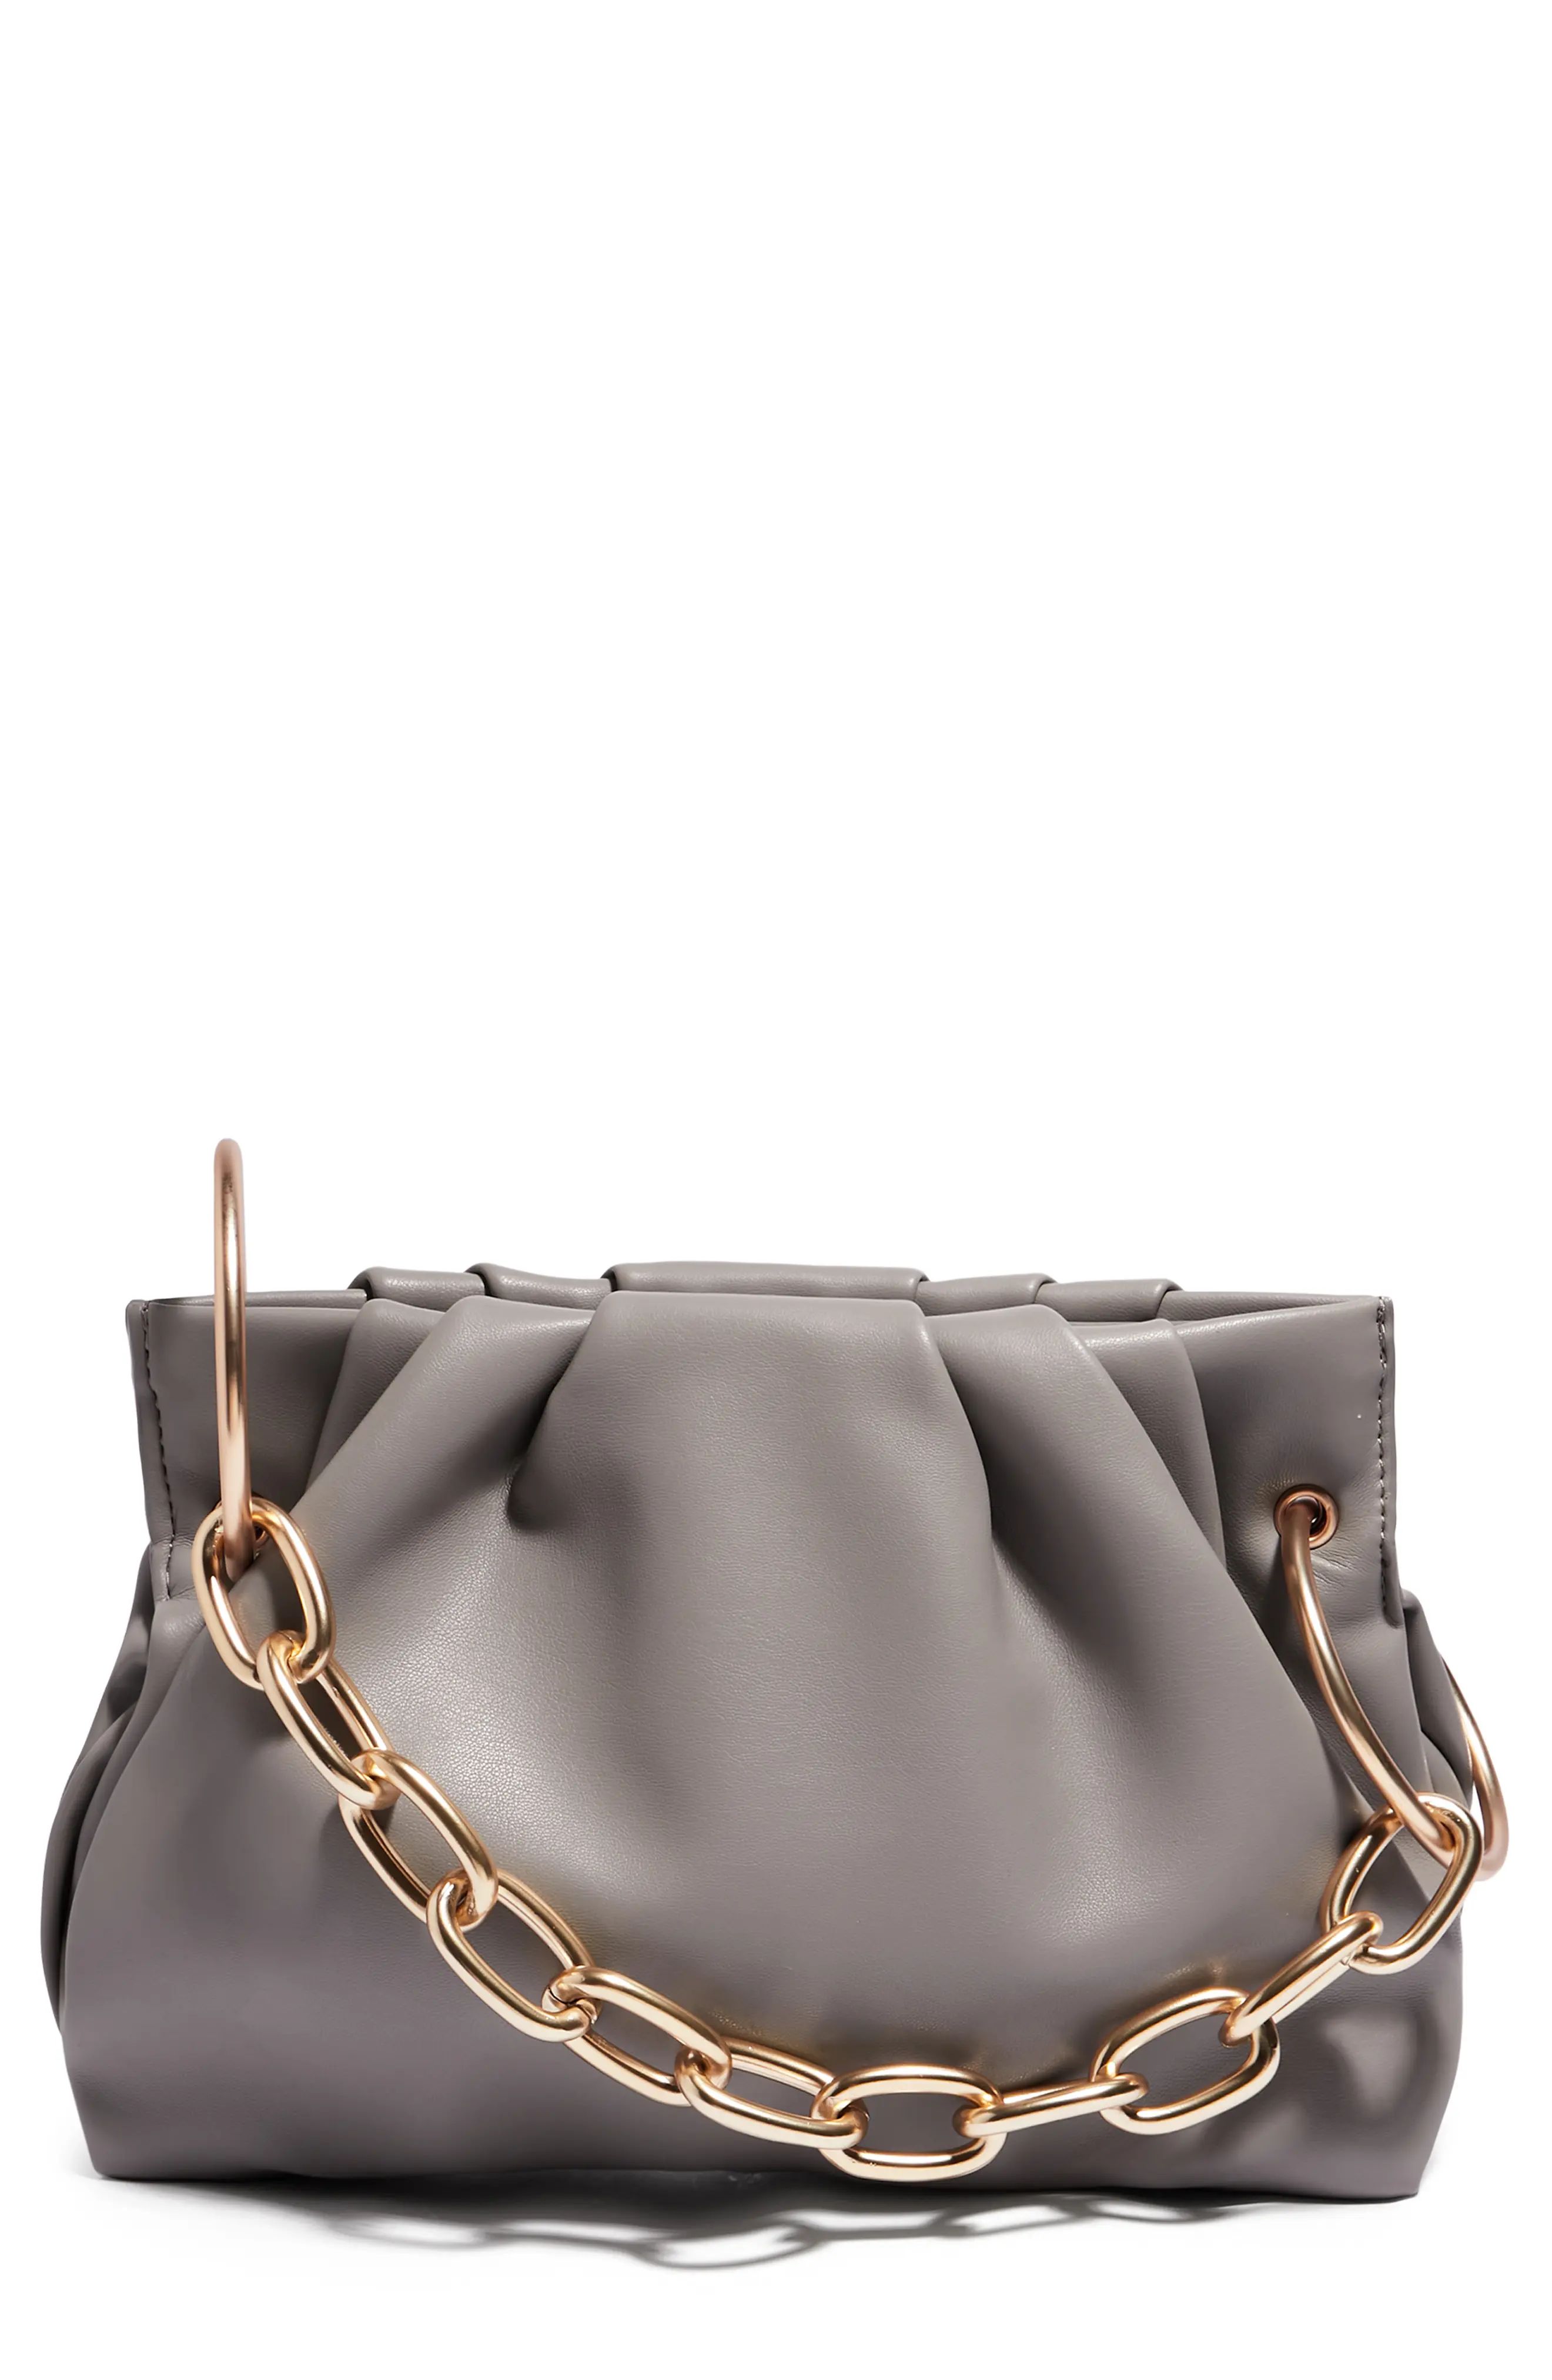 HOUSE OF WANT Chill Vegan Leather Frame Clutch in Grey at Nordstrom | Nordstrom